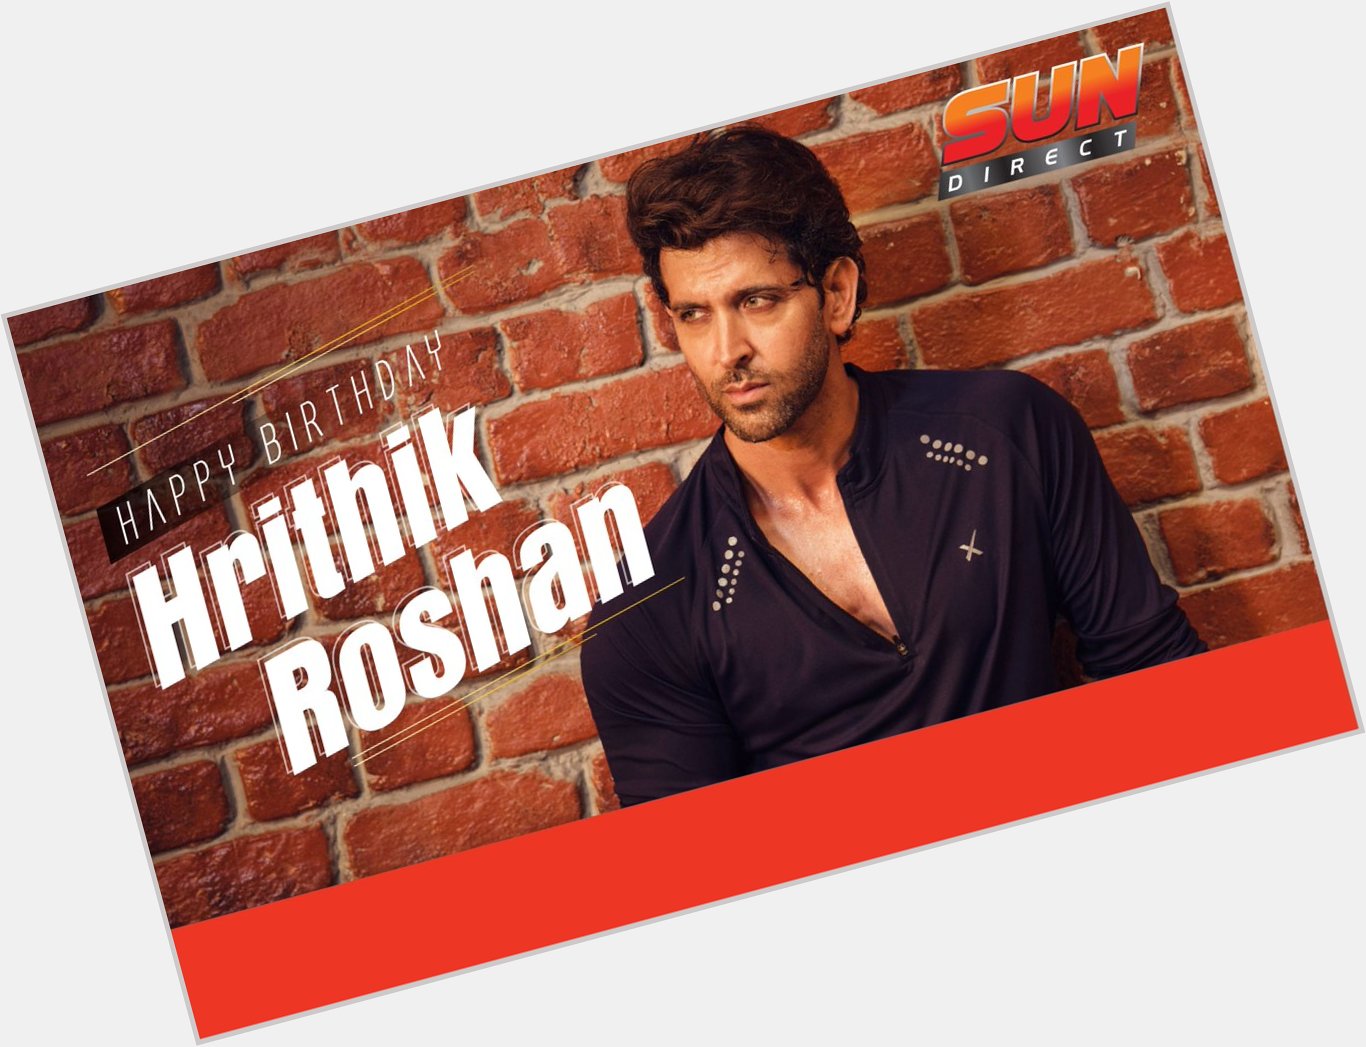 Wishing the Handsome and multi-talented heartthrob Hrithik Roshan a very Happy Birthday! :) 